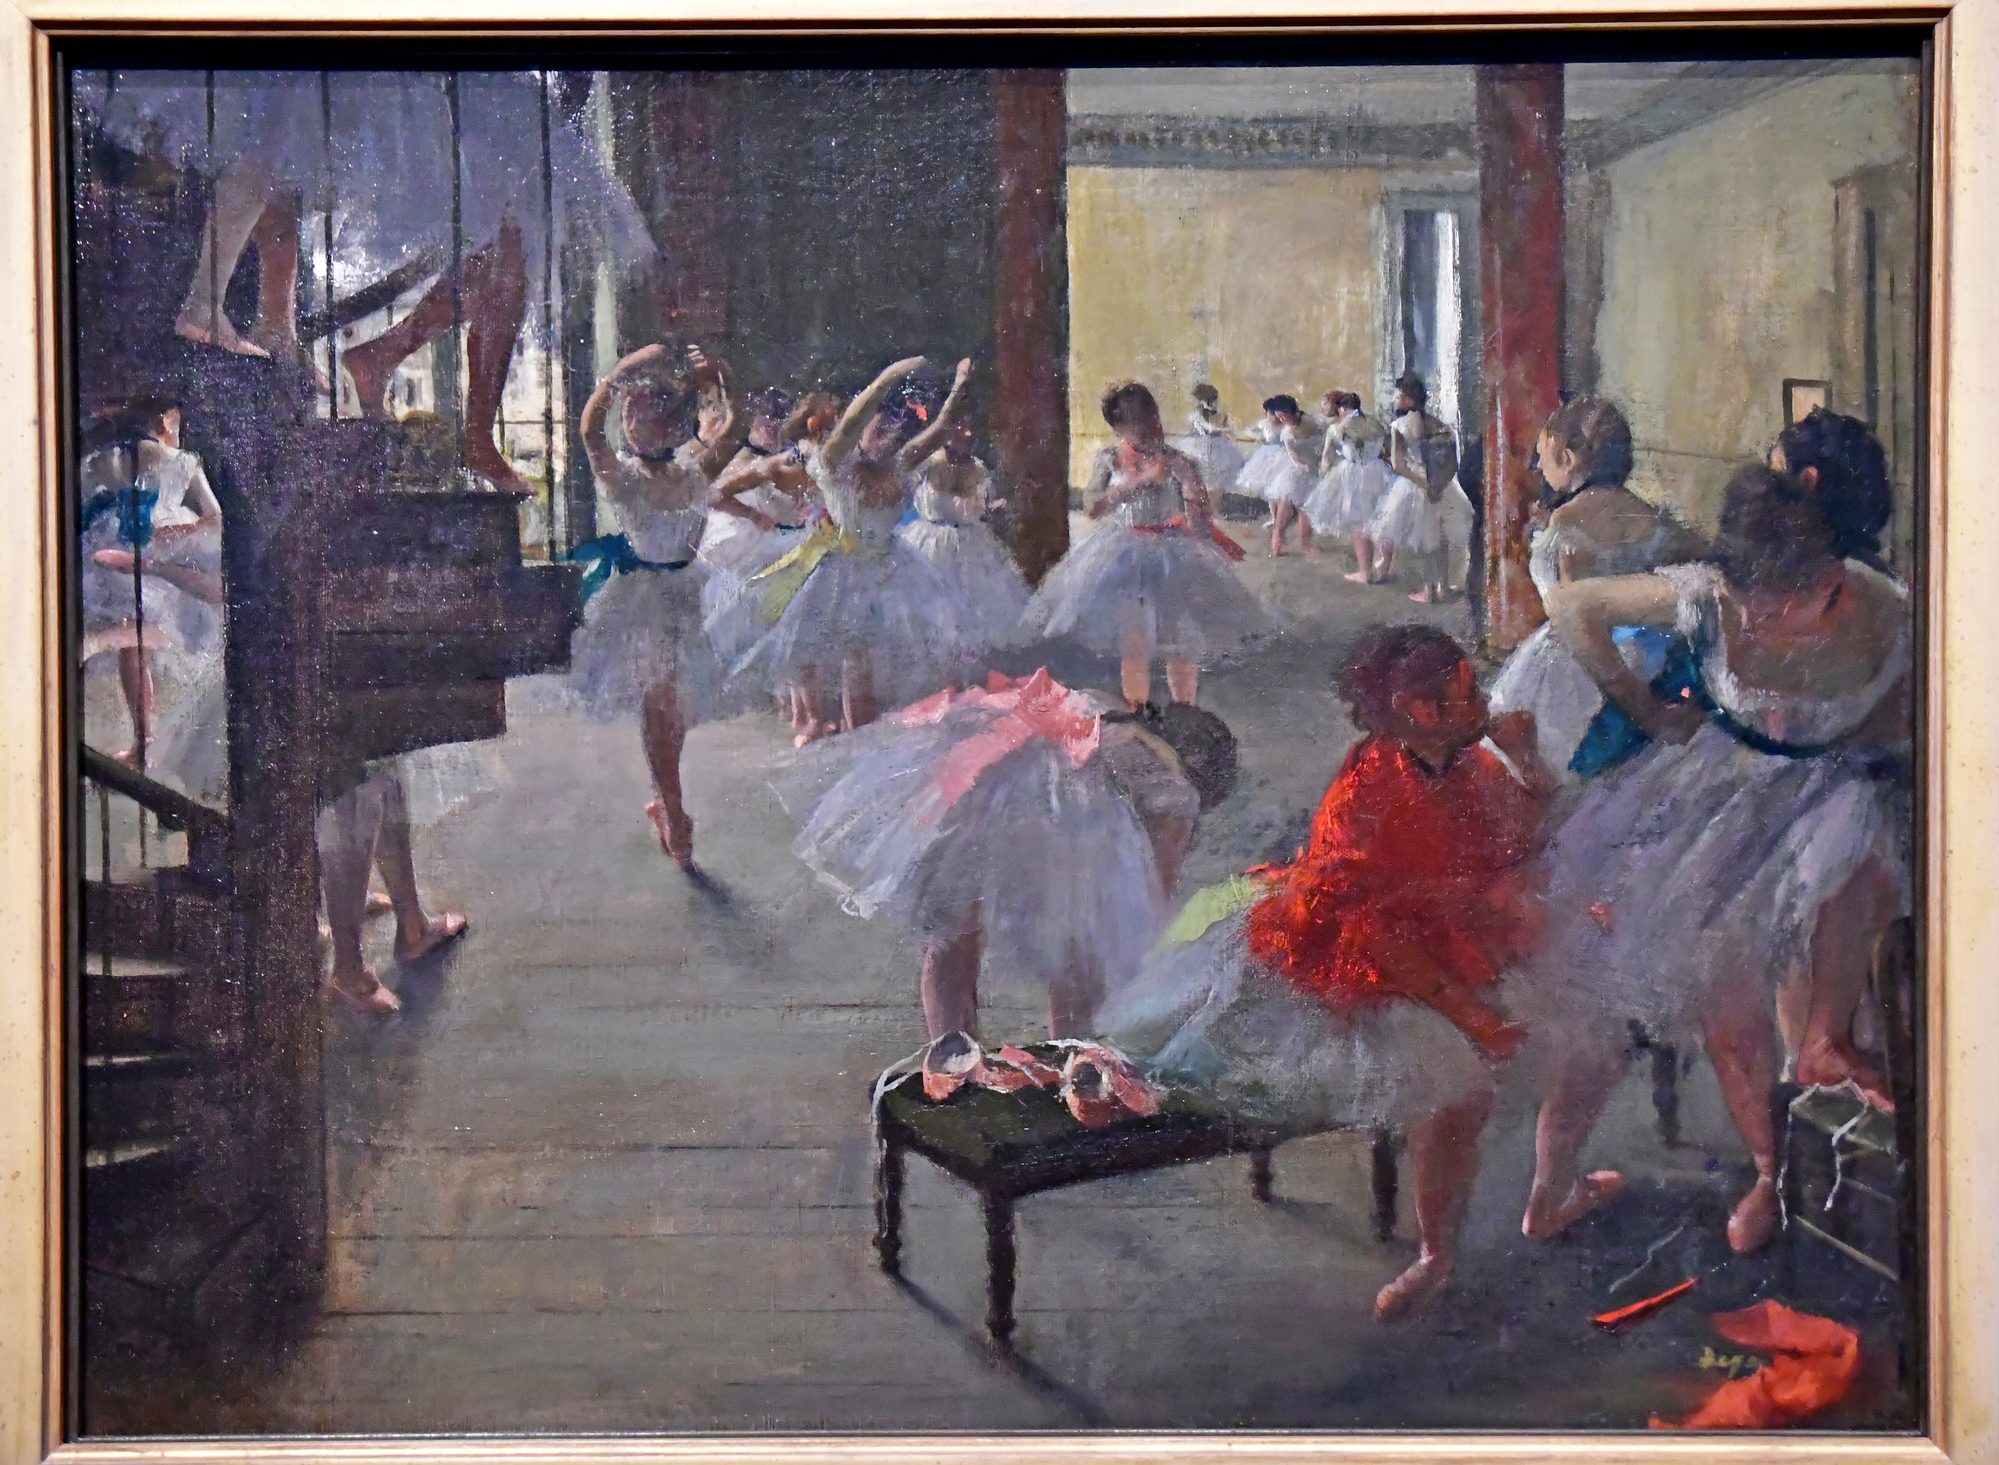 Essay on Painting: Edgar Degas and His “Dancing” Pictures